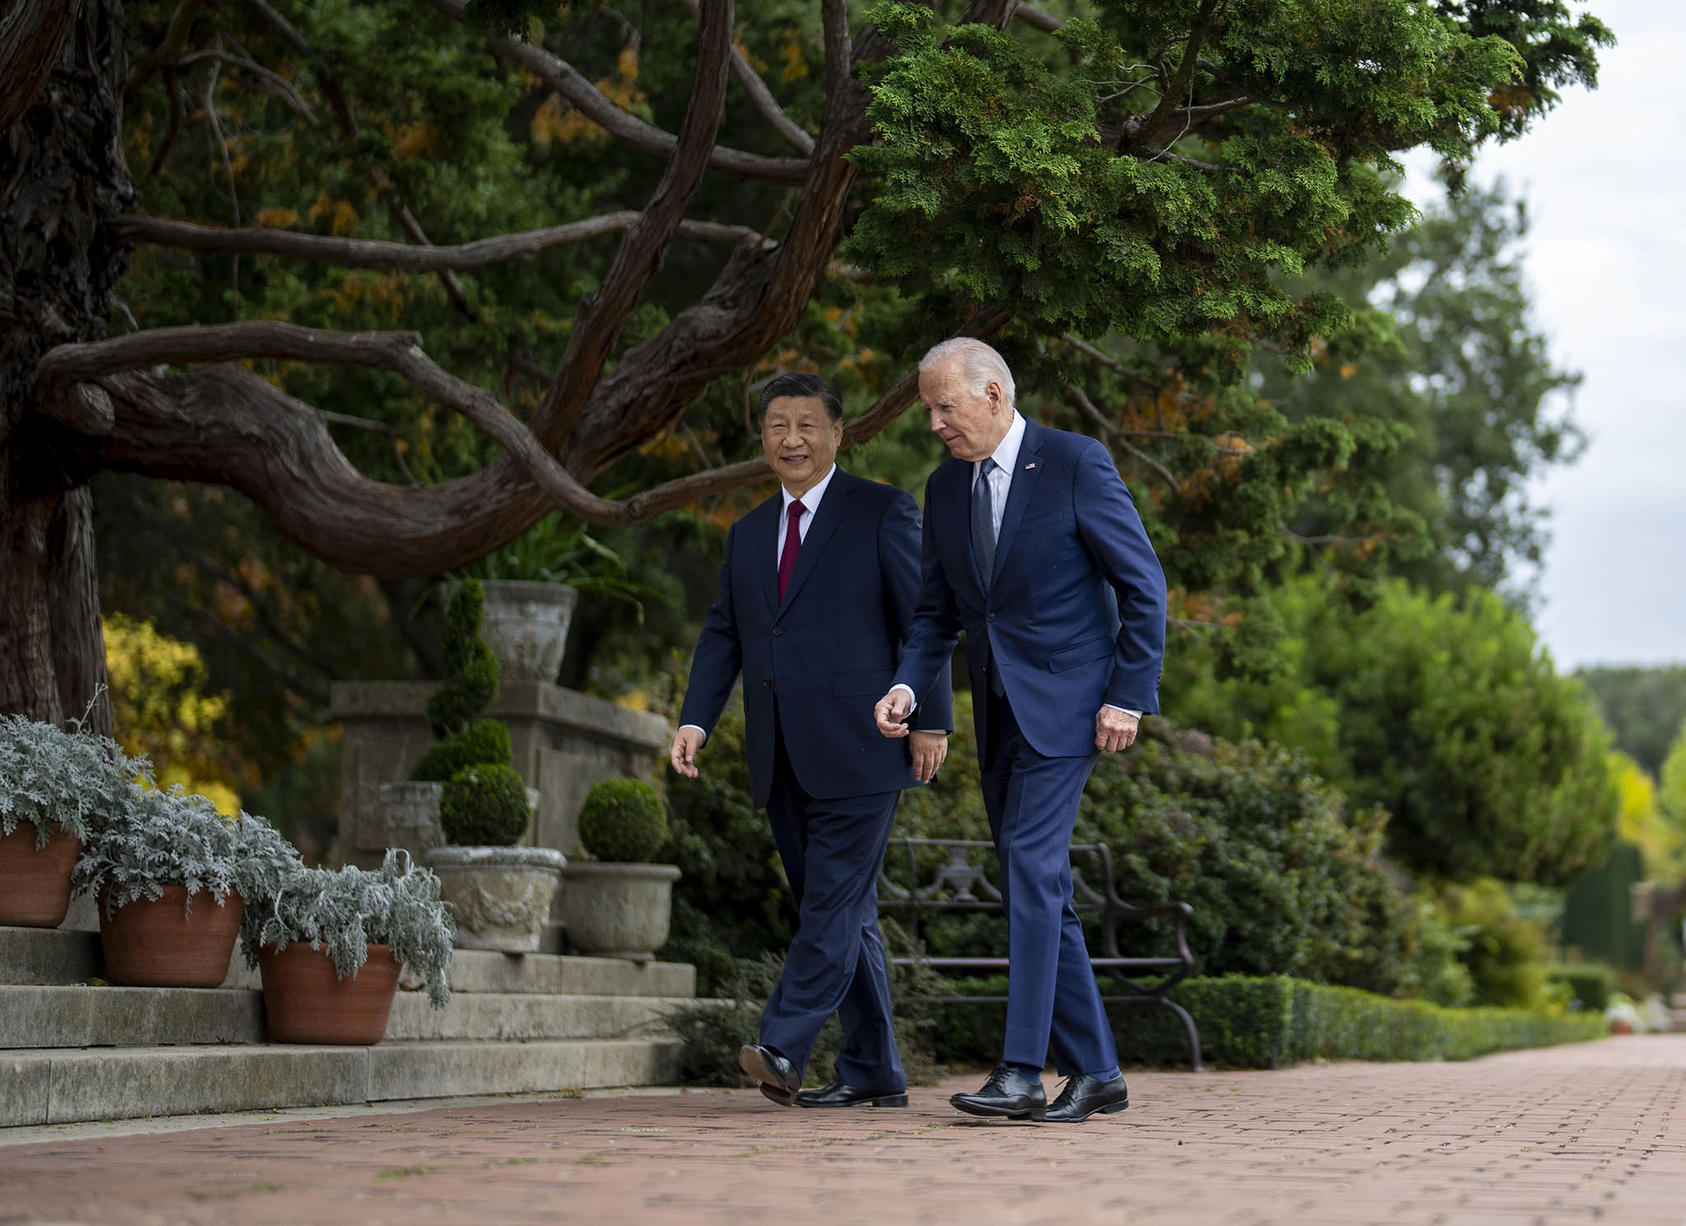 President Joe Biden and Chinese leader Xi Jinping walk through the garden at the Filoli estate in Woodside, California, during their meeting at the APEC Summit. November 15, 2023. (Doug Mills/The New York Times)